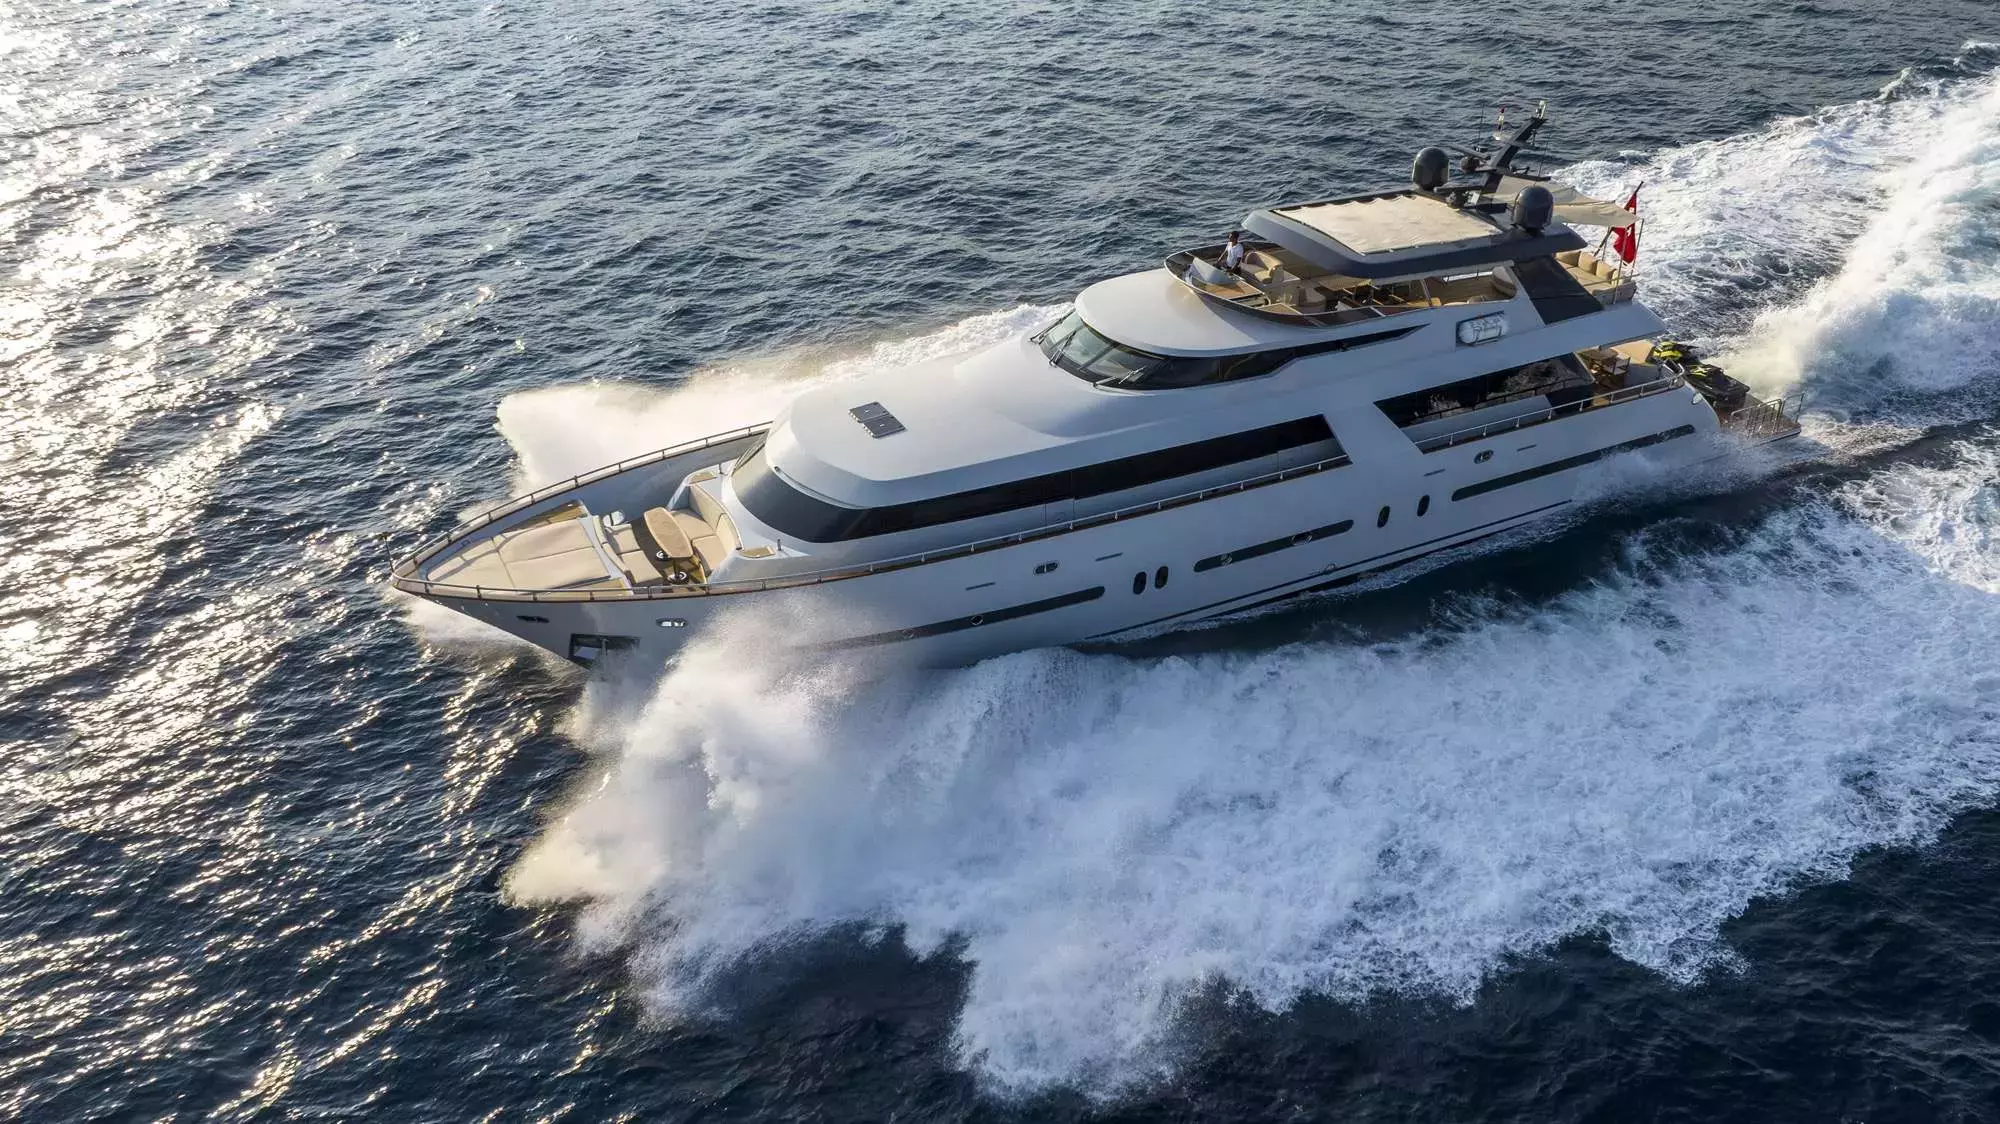 Go by Custom Made - Top rates for a Charter of a private Motor Yacht in Greece